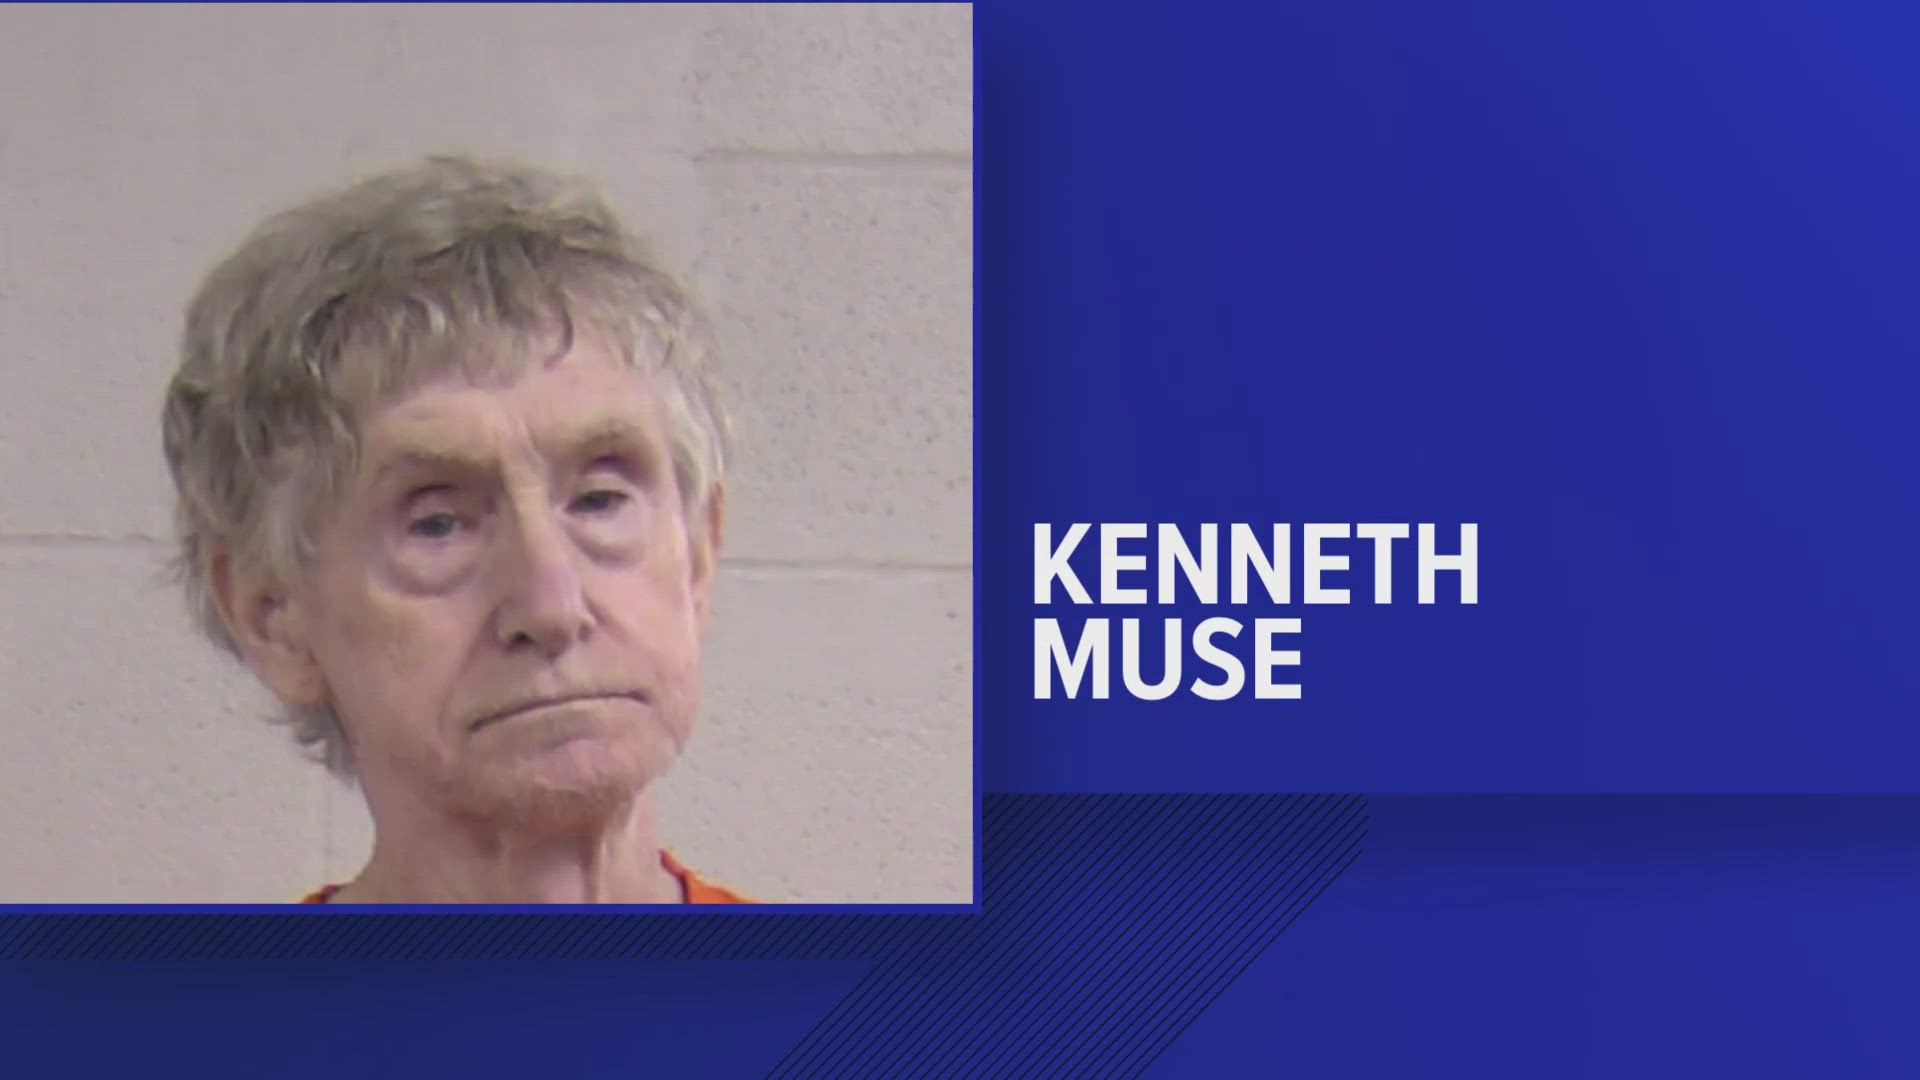 Investigators said Kenneth Muse was the one who called 911 and admitted to stabbing the woman.